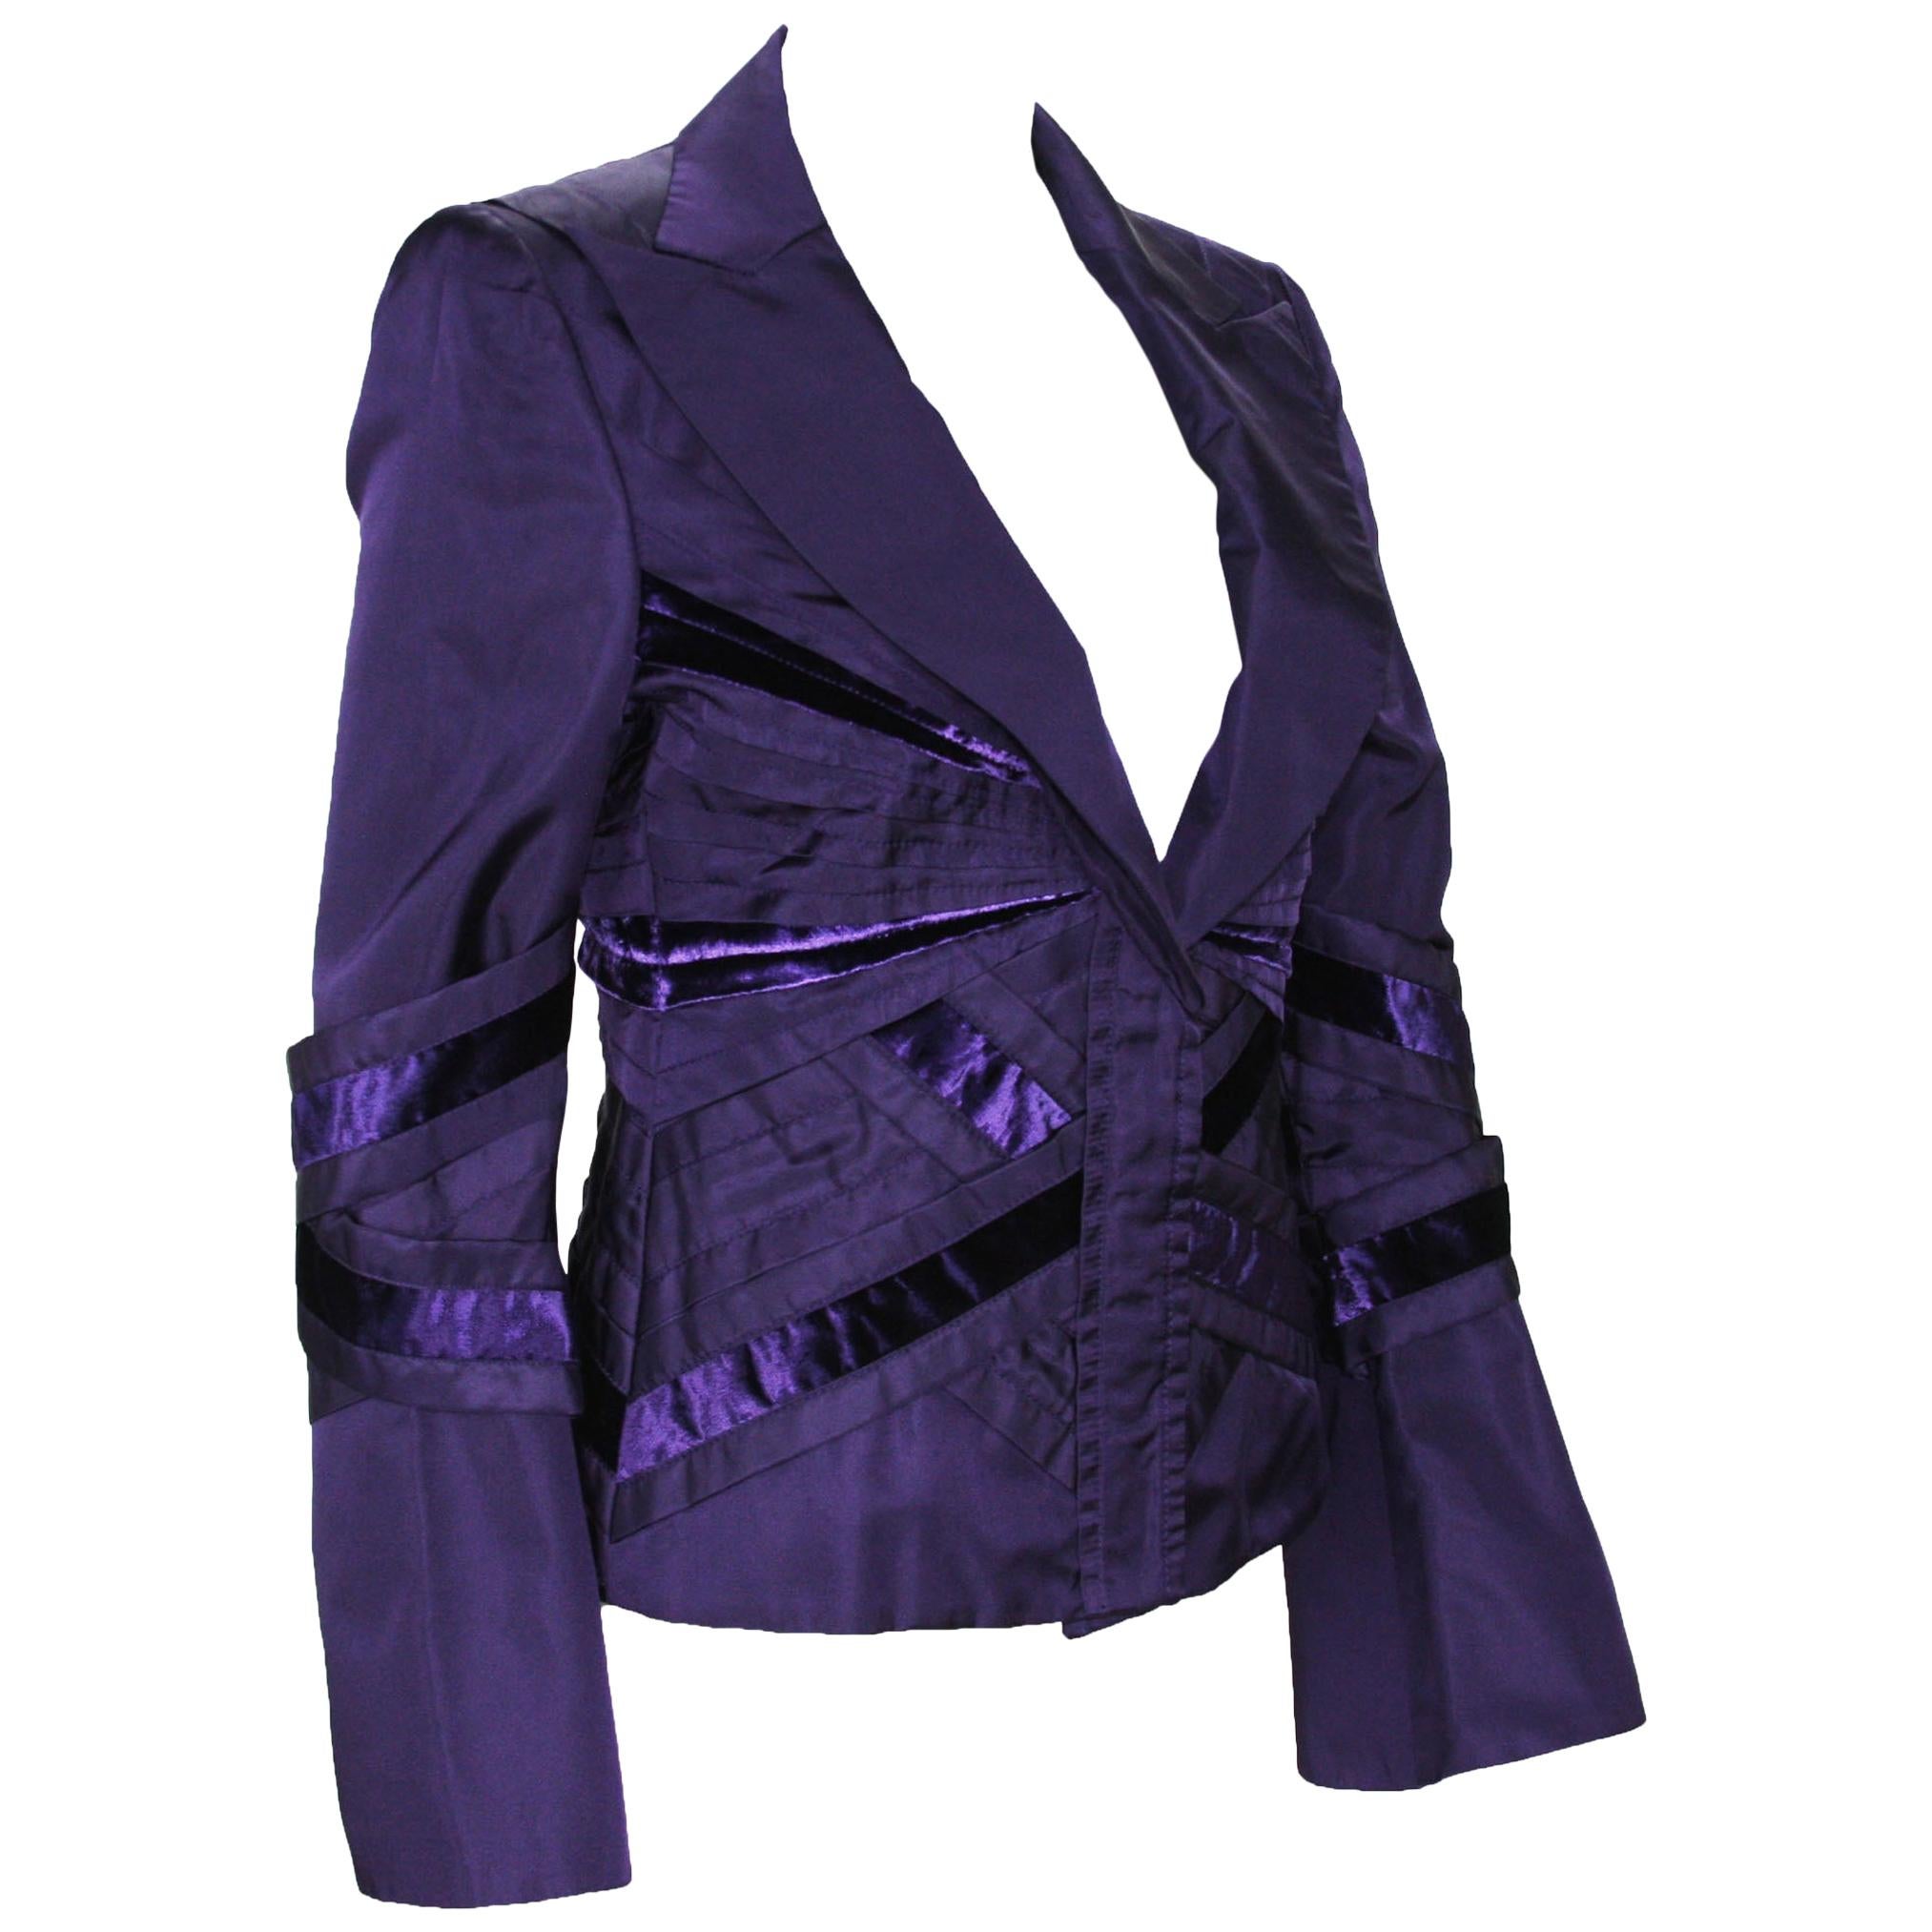 Tom Ford for Gucci F/W 2004 Runway Collection Purple Silk Taffeta Jacket 42 - 6 For Sale